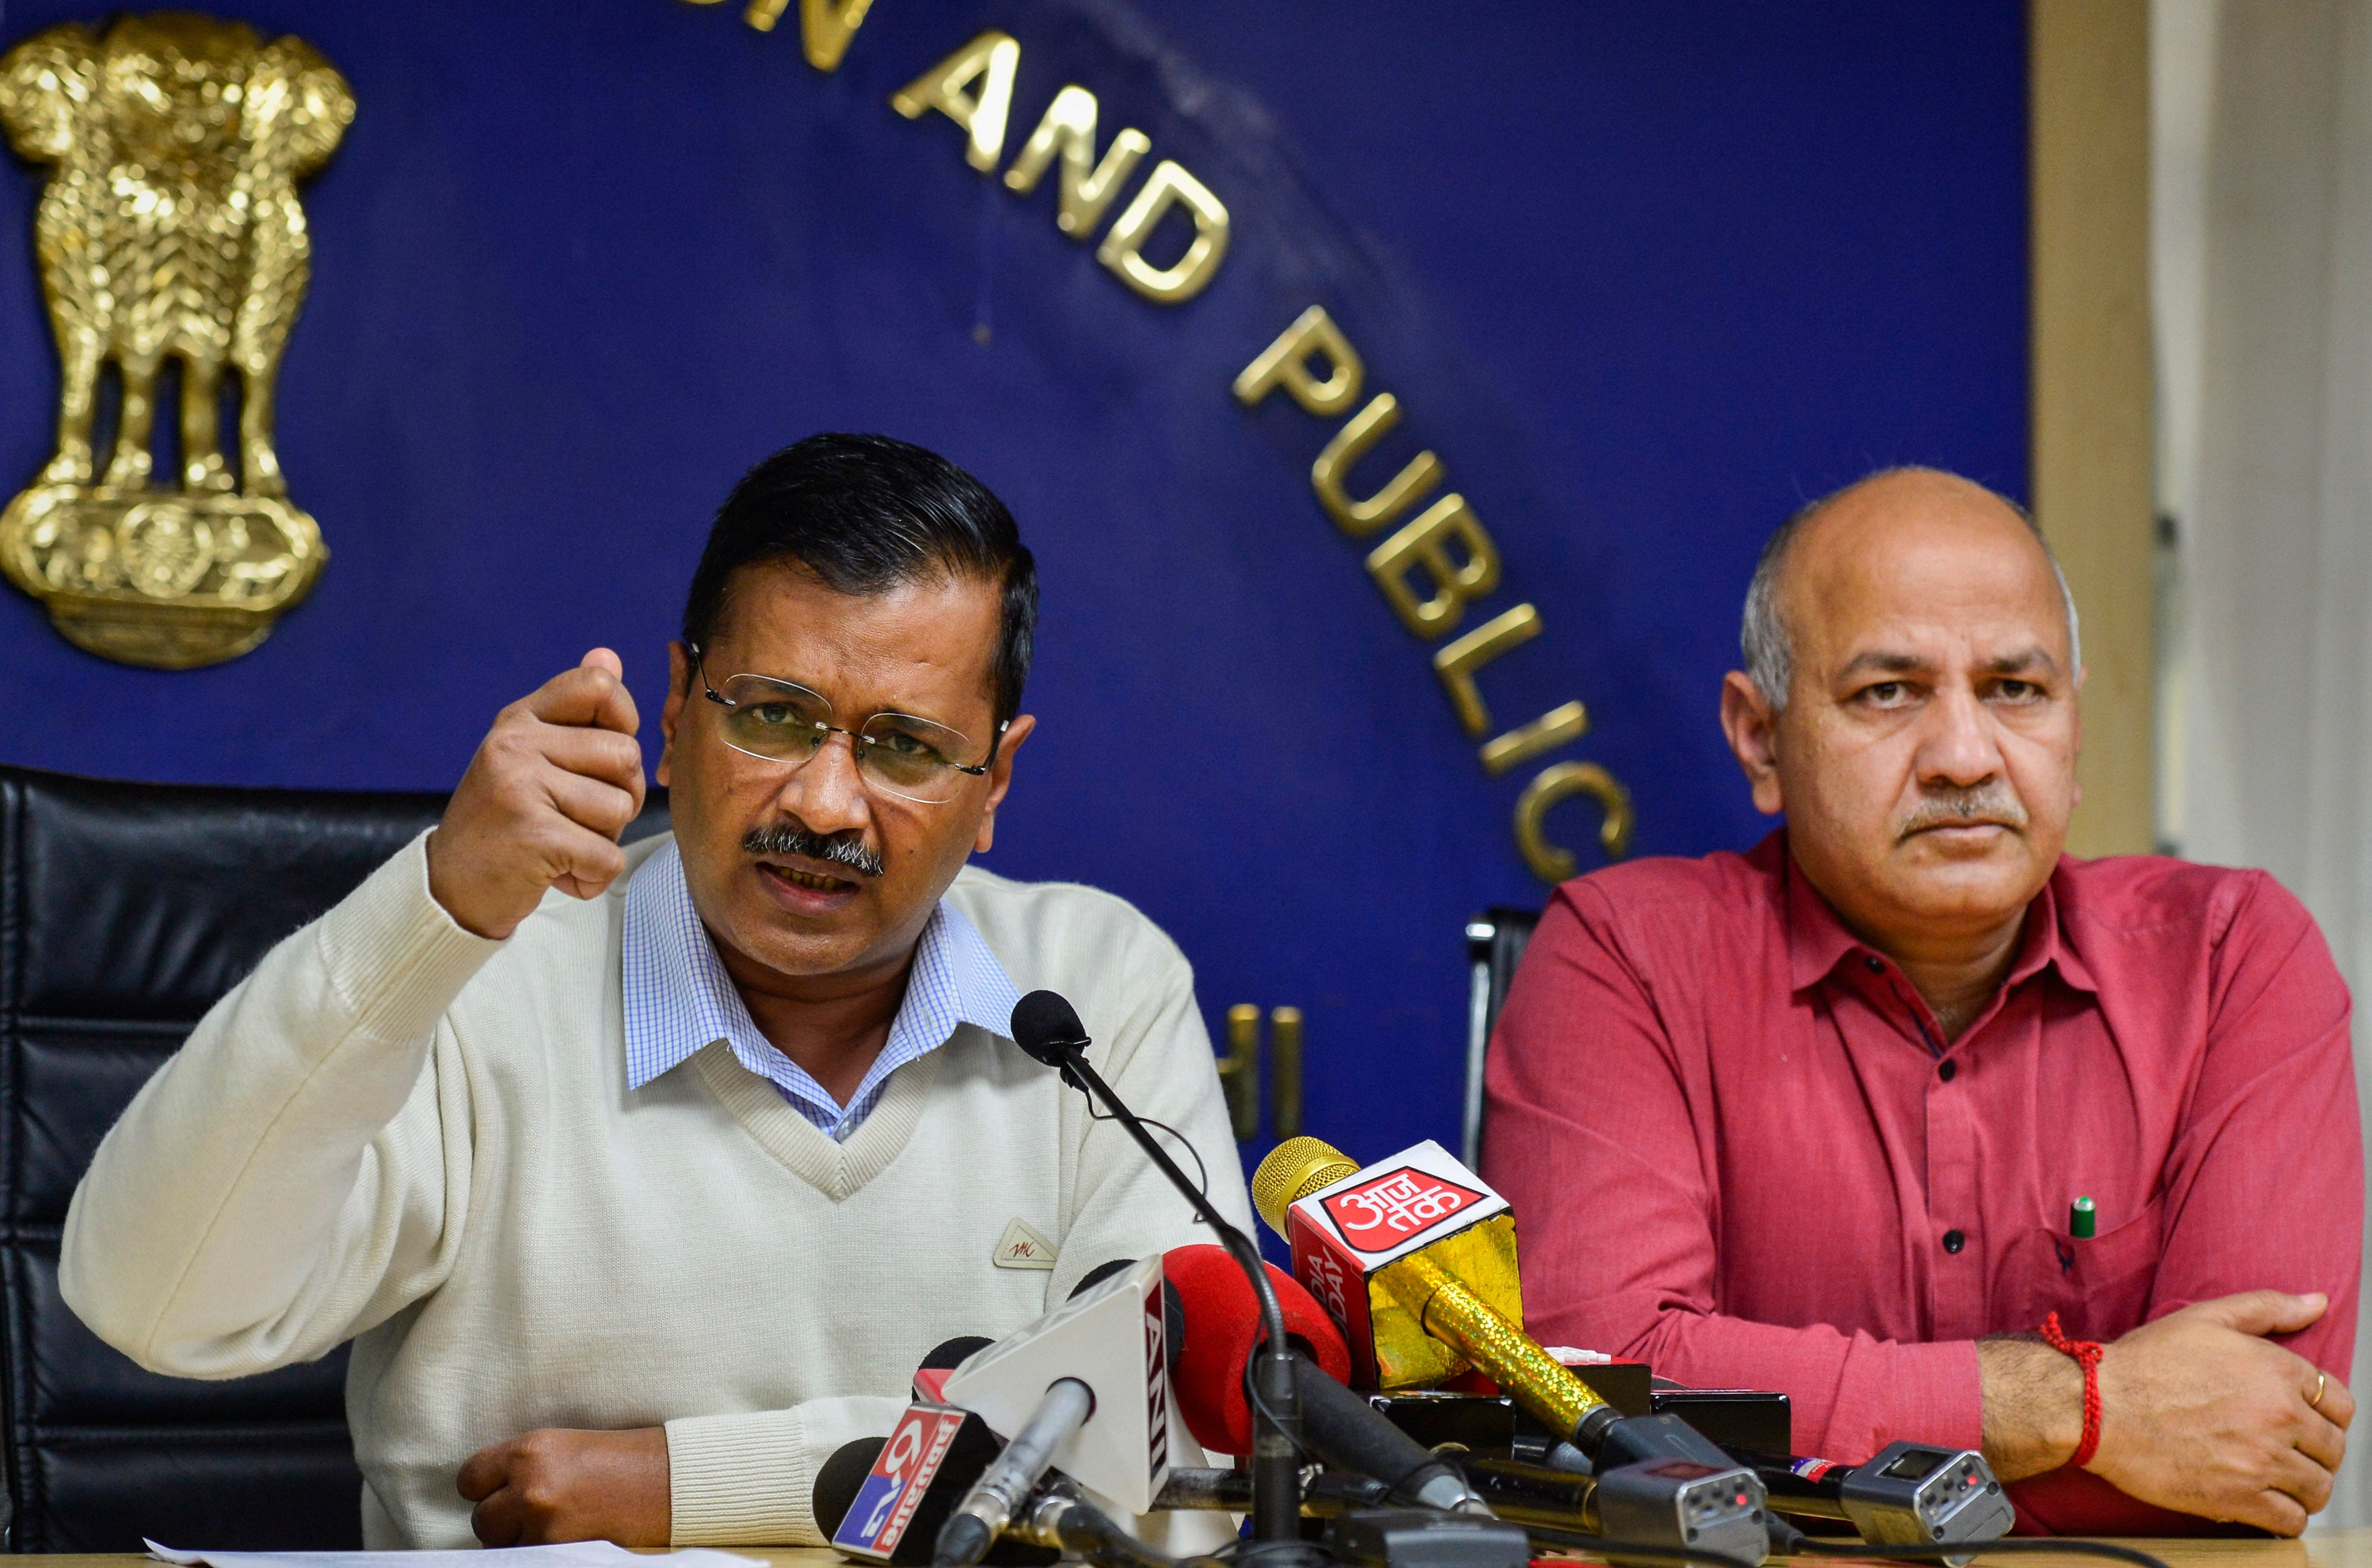 Delhi Chief Minister Arvind Kejriwal addresses a press conference as Deputy Chief Minister Manish Sisodia. (PTI Photo)